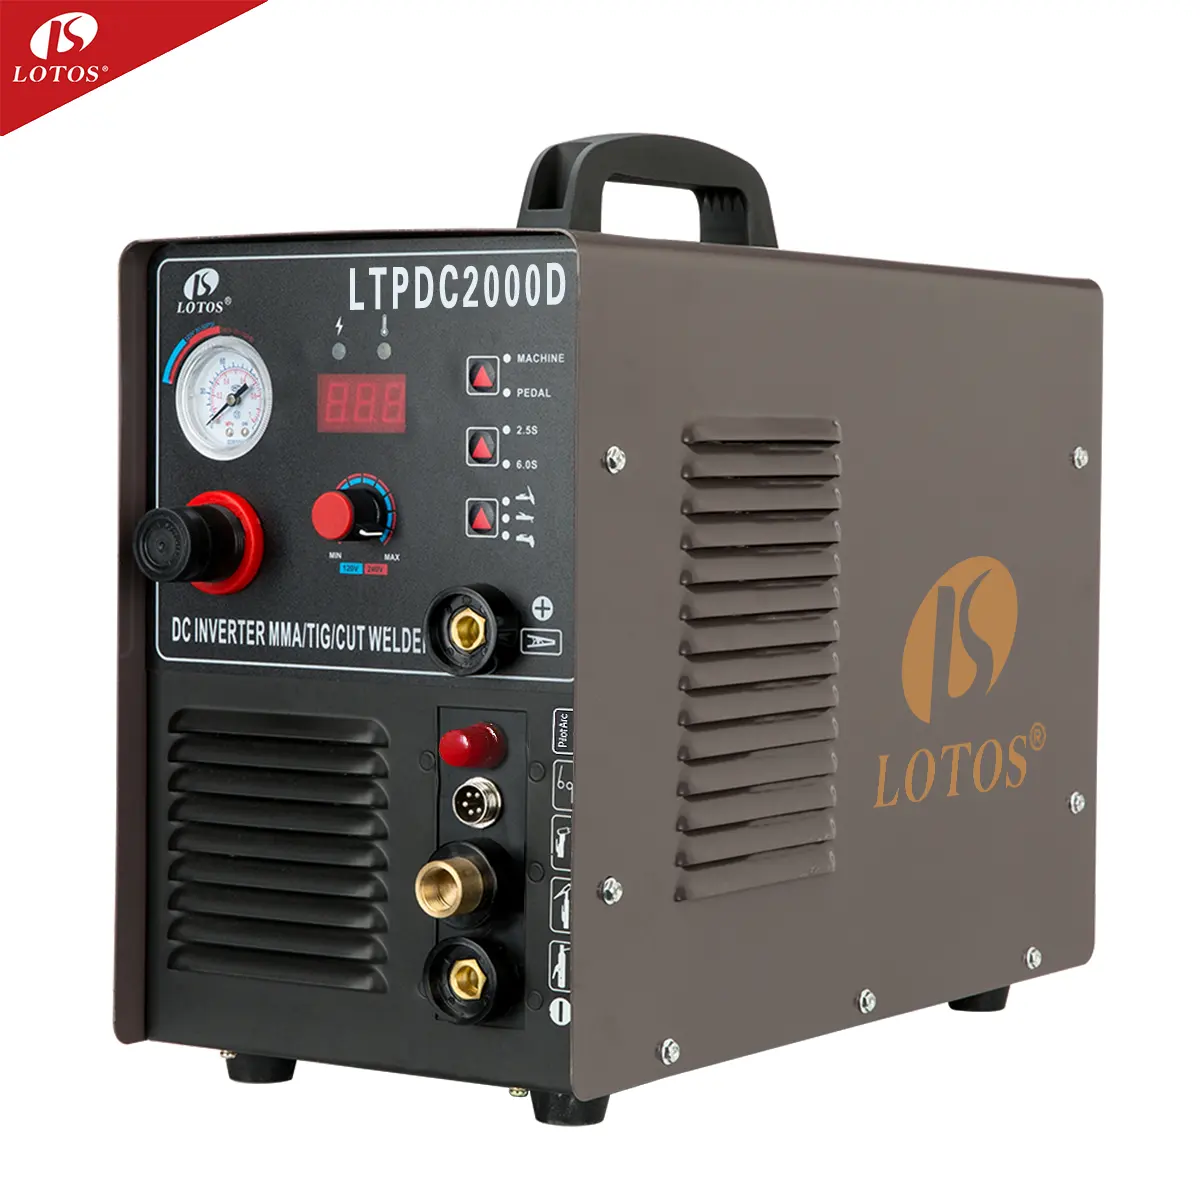 The Lotos LTPDC2000D 110/220V High Quality Air Cut 3in 1 tig mma torch arc welders 110v 220v